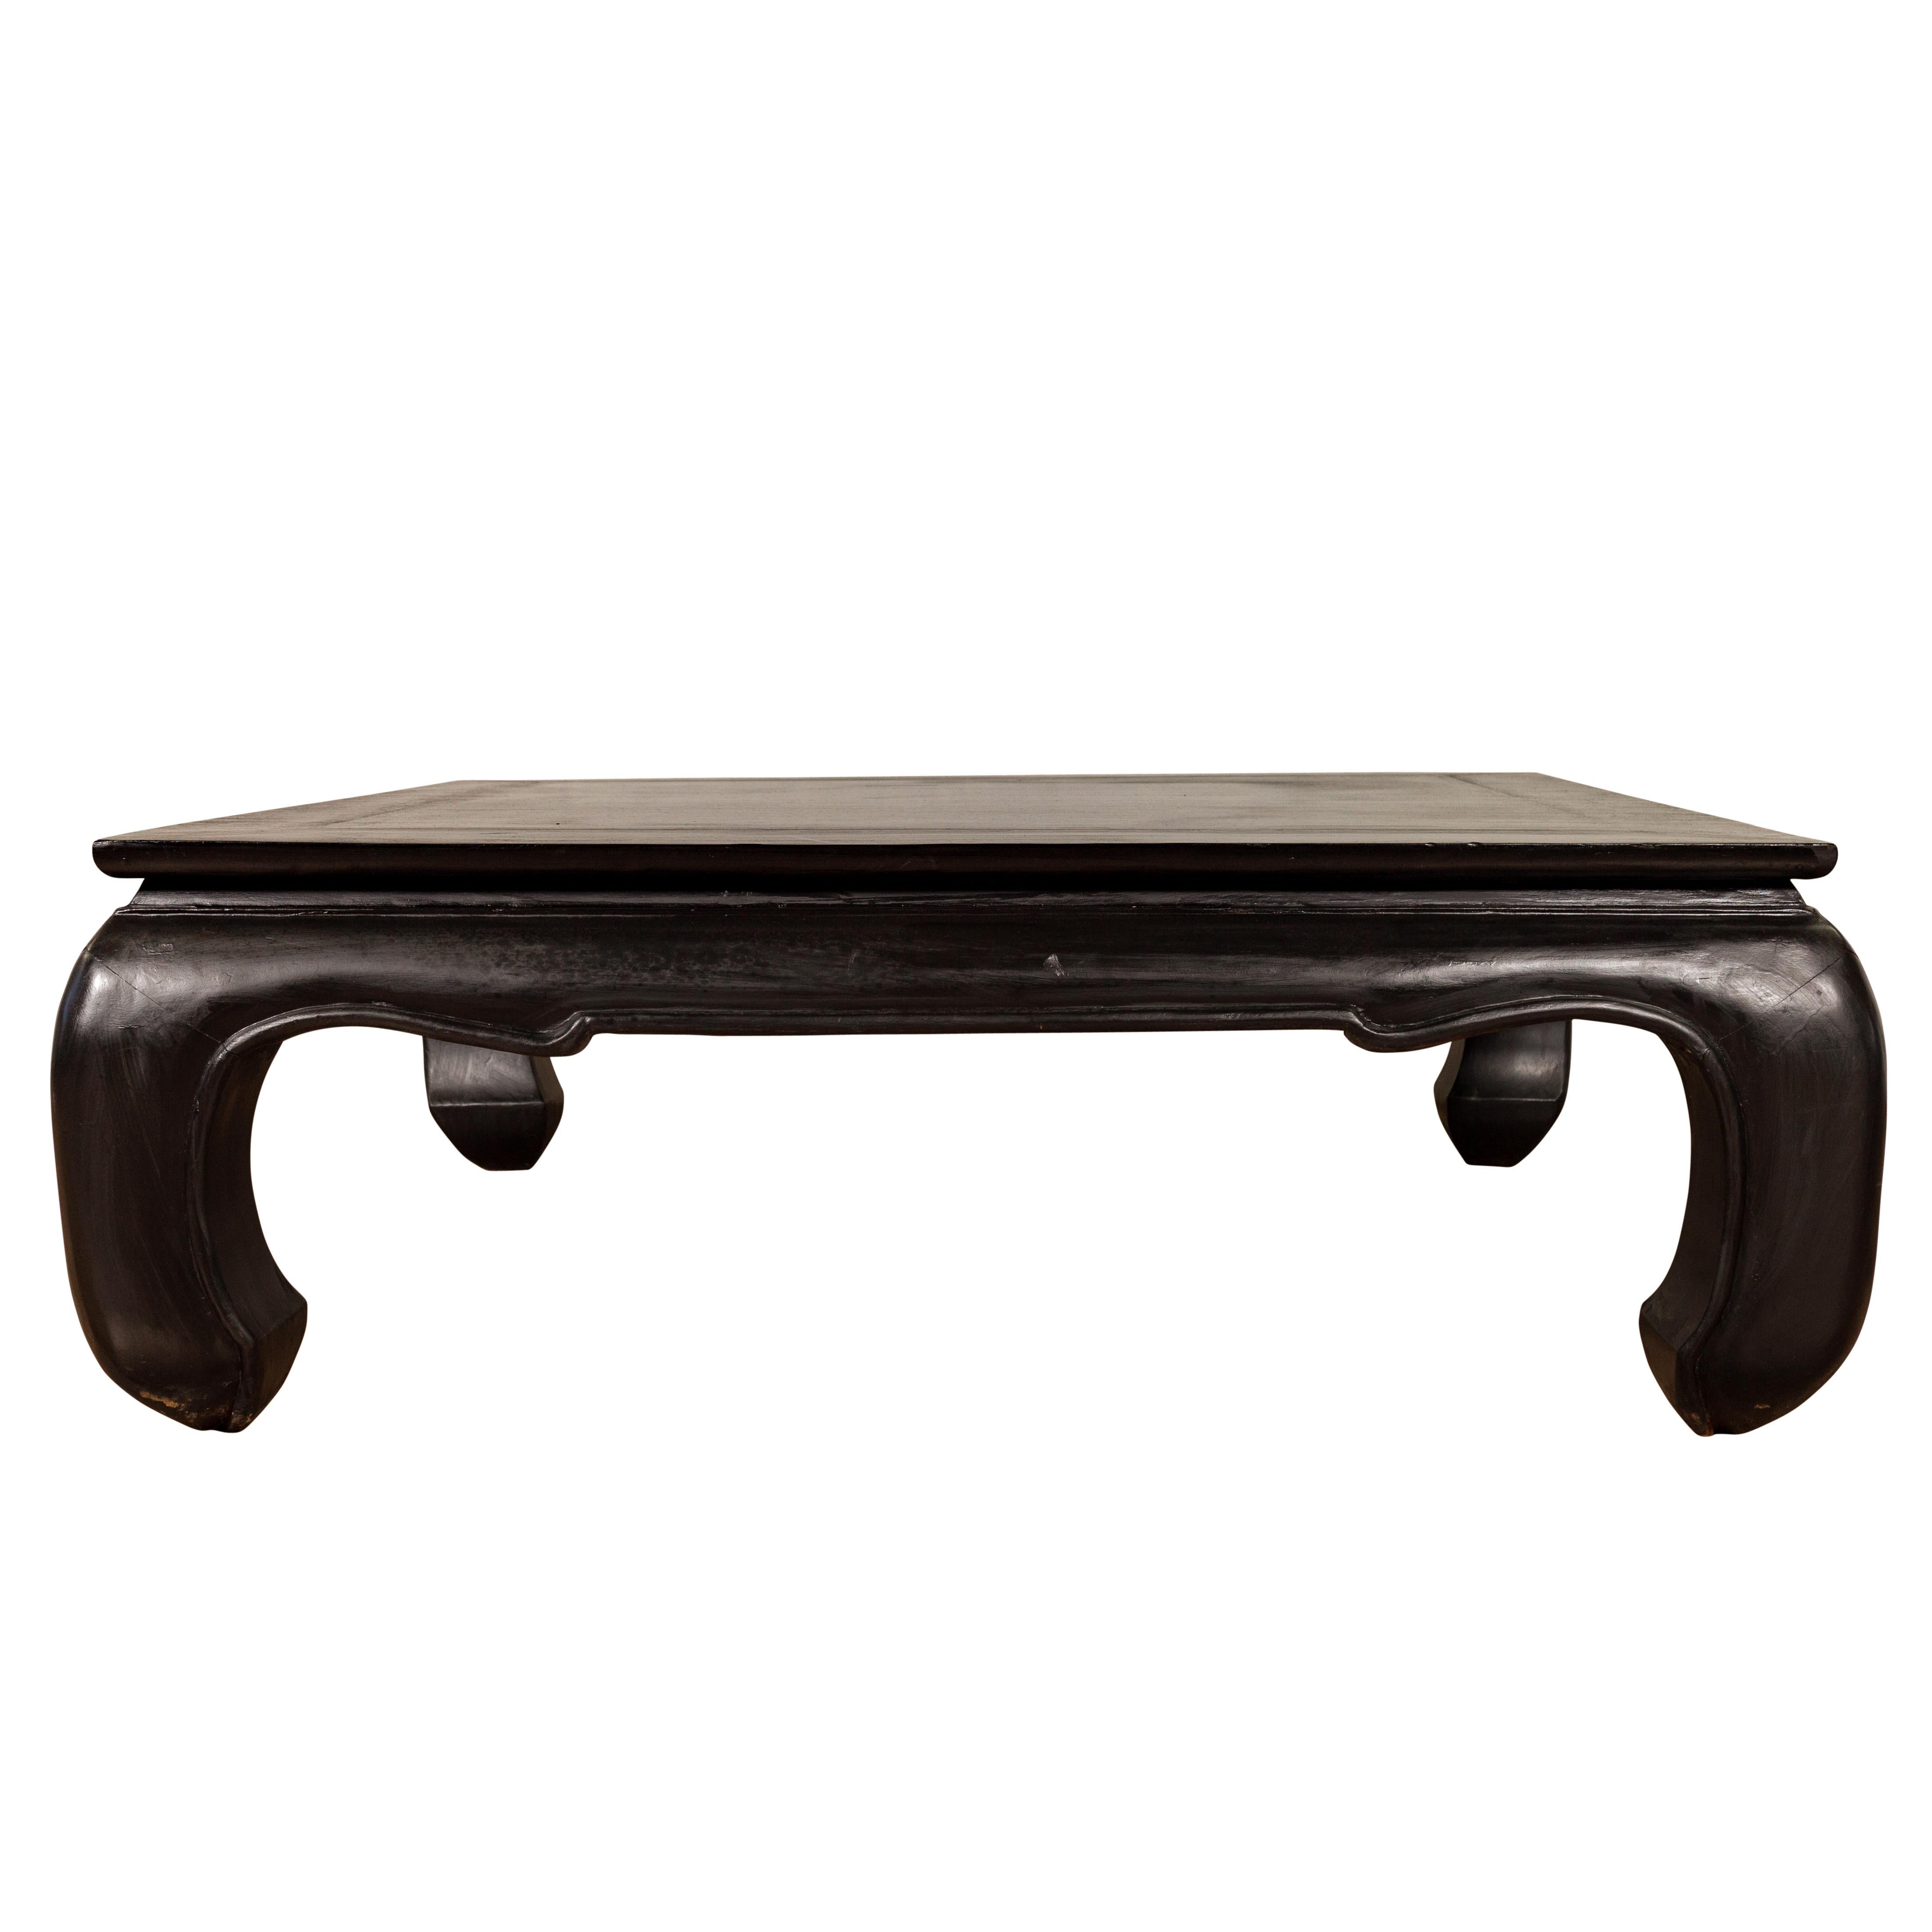 Vintage Thai Teak Coffee Table with Bulging Chow Legs and Black Lacquer